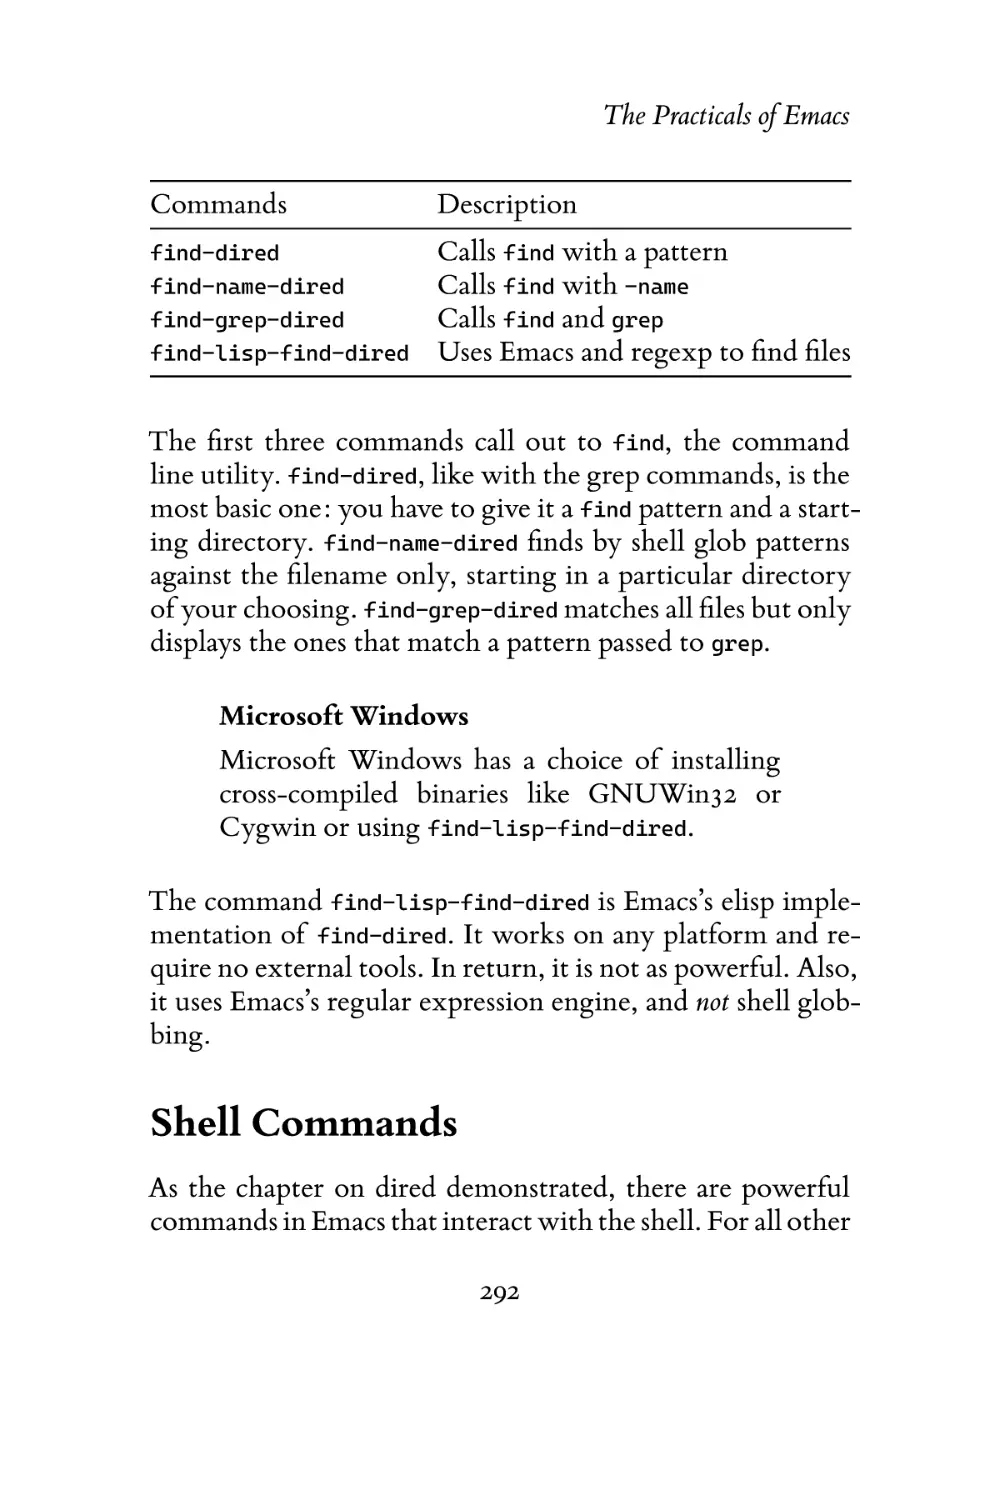 Shell Commands